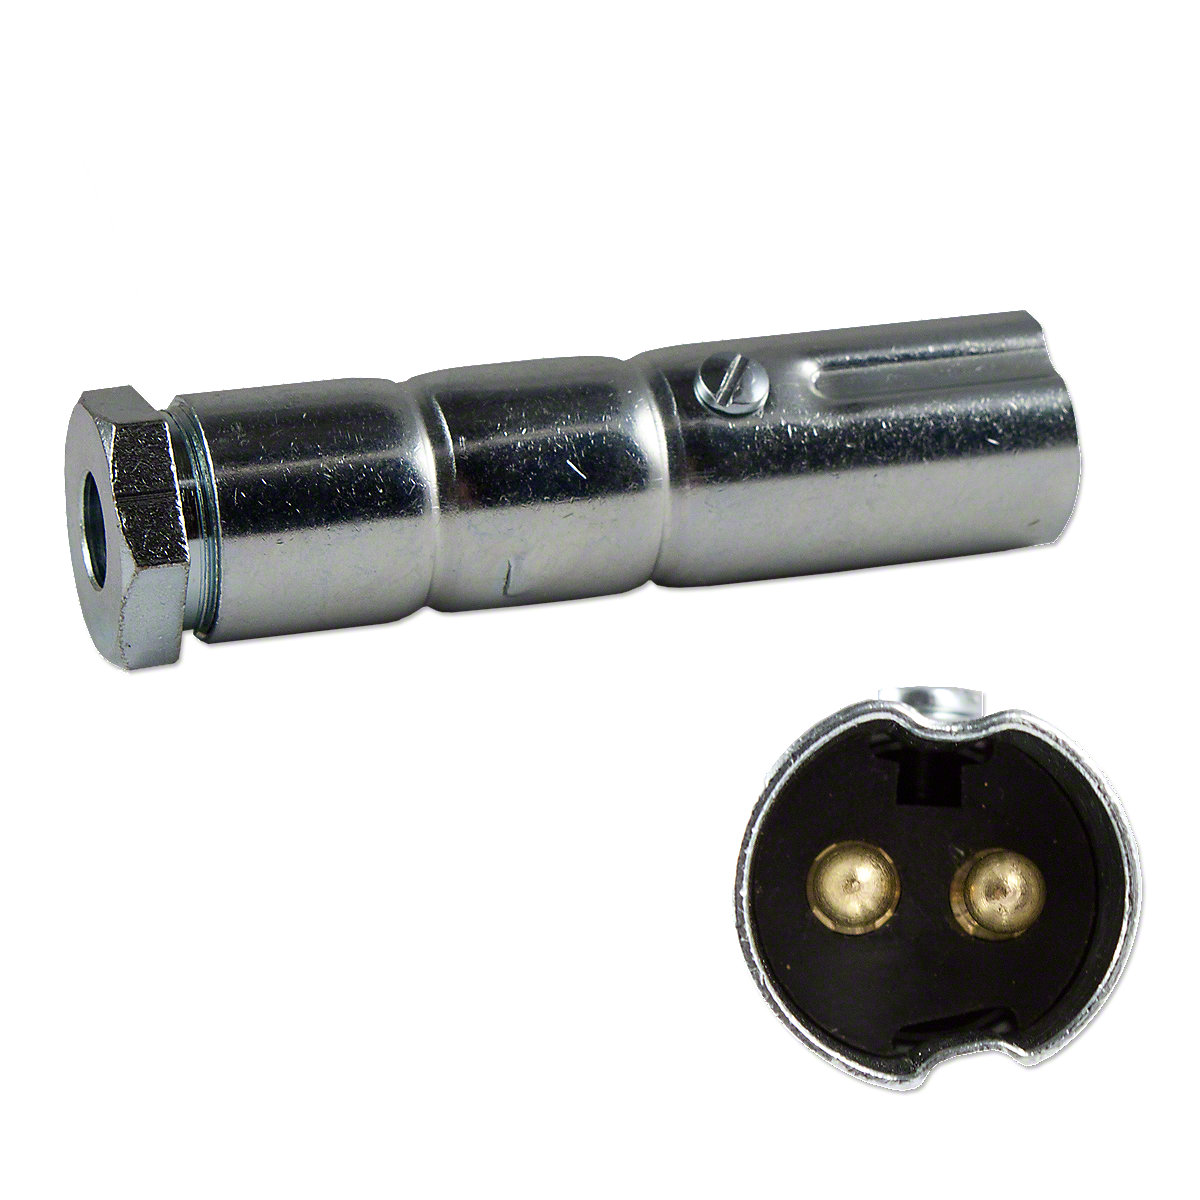 Auxiliary Male 2 Pin Connector Plug